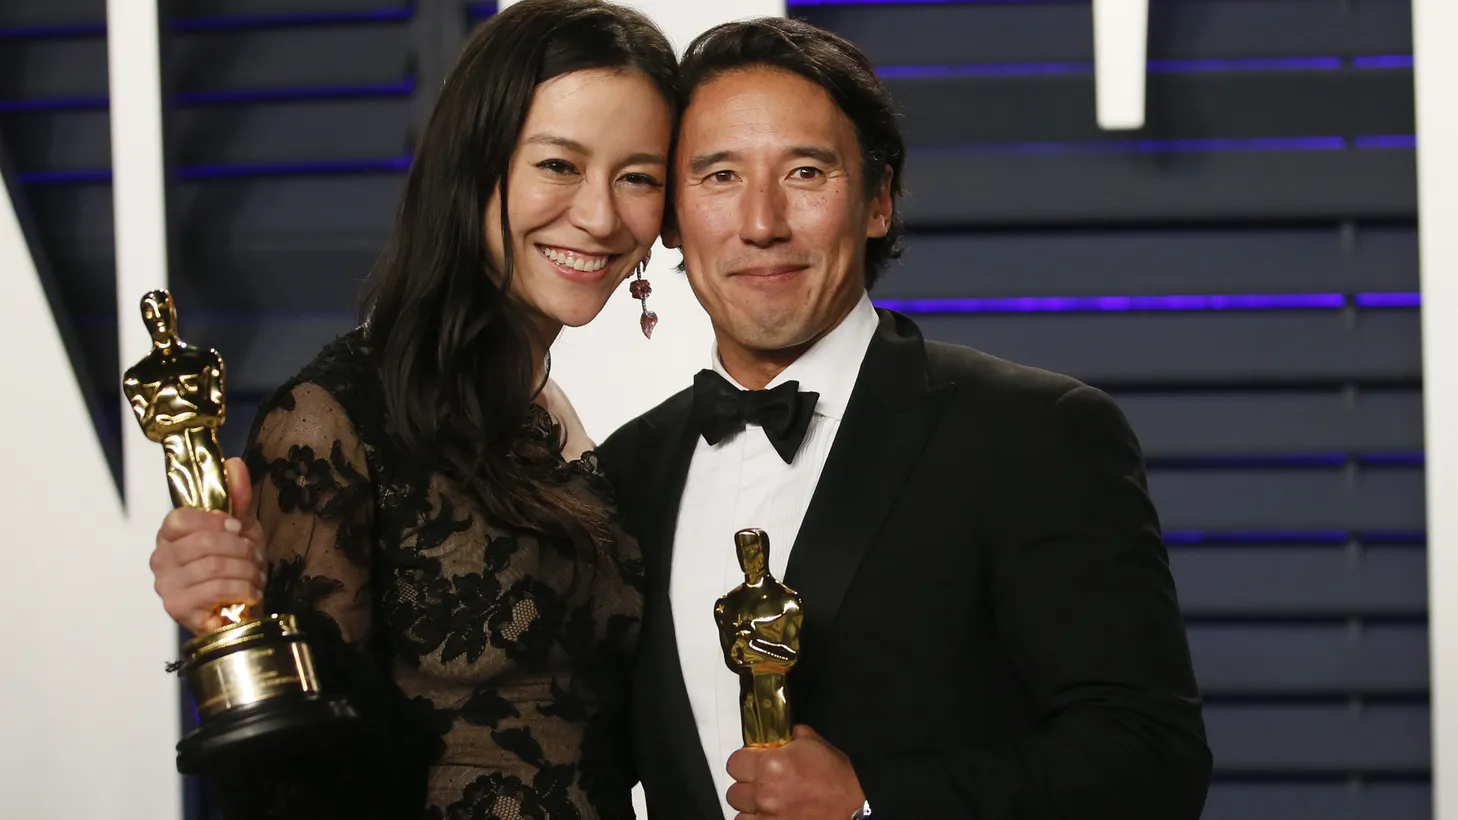 Chai Vasarhelyi (L) and Jimmy Chin hold their award for best documentary feature for “Free Solo” at the Vanity Fair party in Beverly Hills, on February 24, 2019.